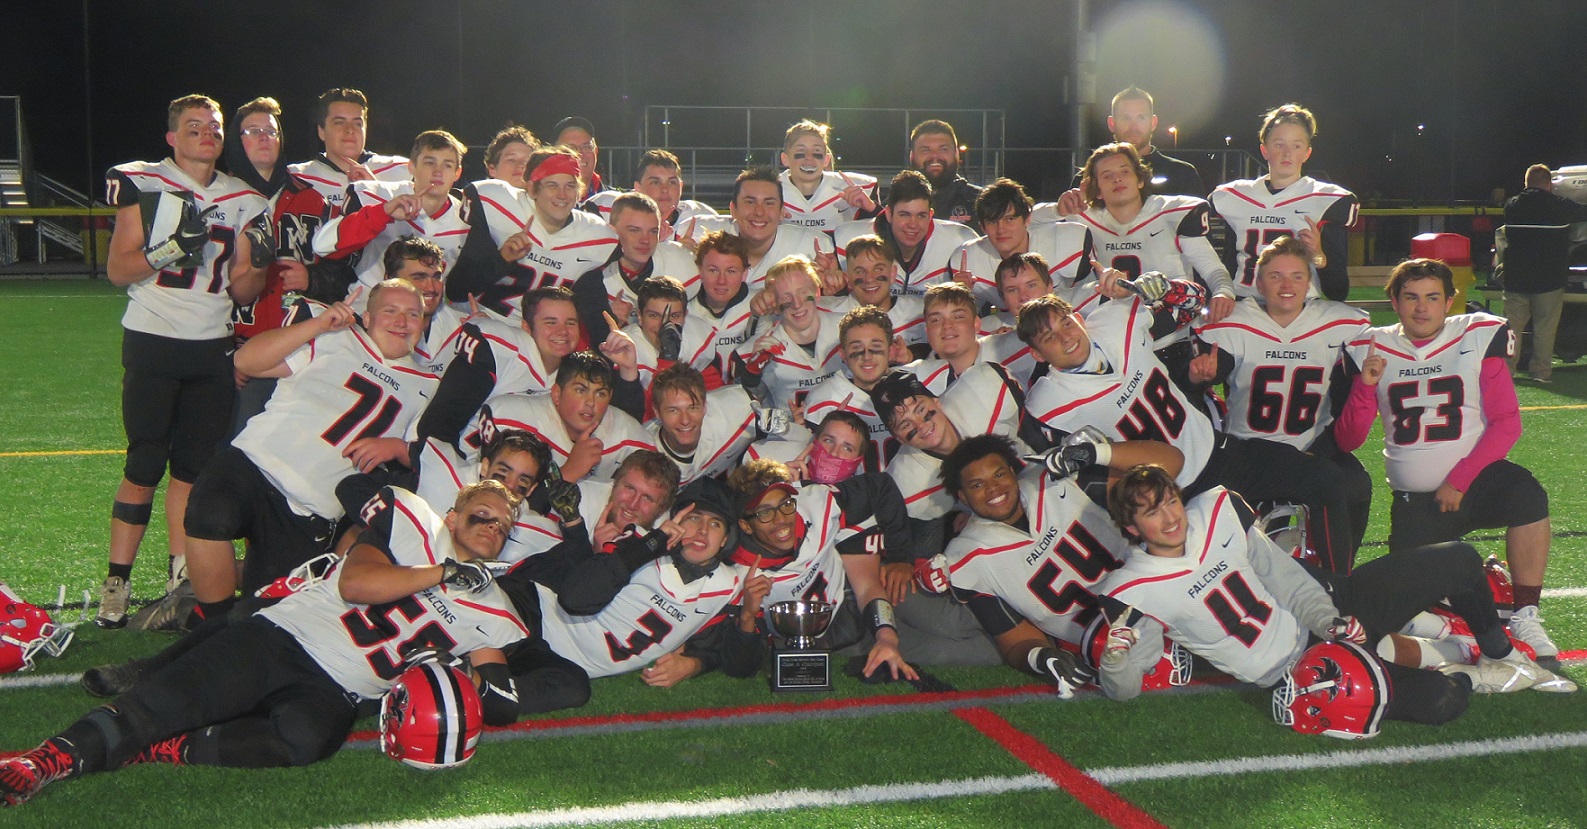 The Niagara-Wheatfield Falcons football team poses after winning the Chuck Funke Bowl Thursday night. The team finished 6-3. (Photos by David Yarger)